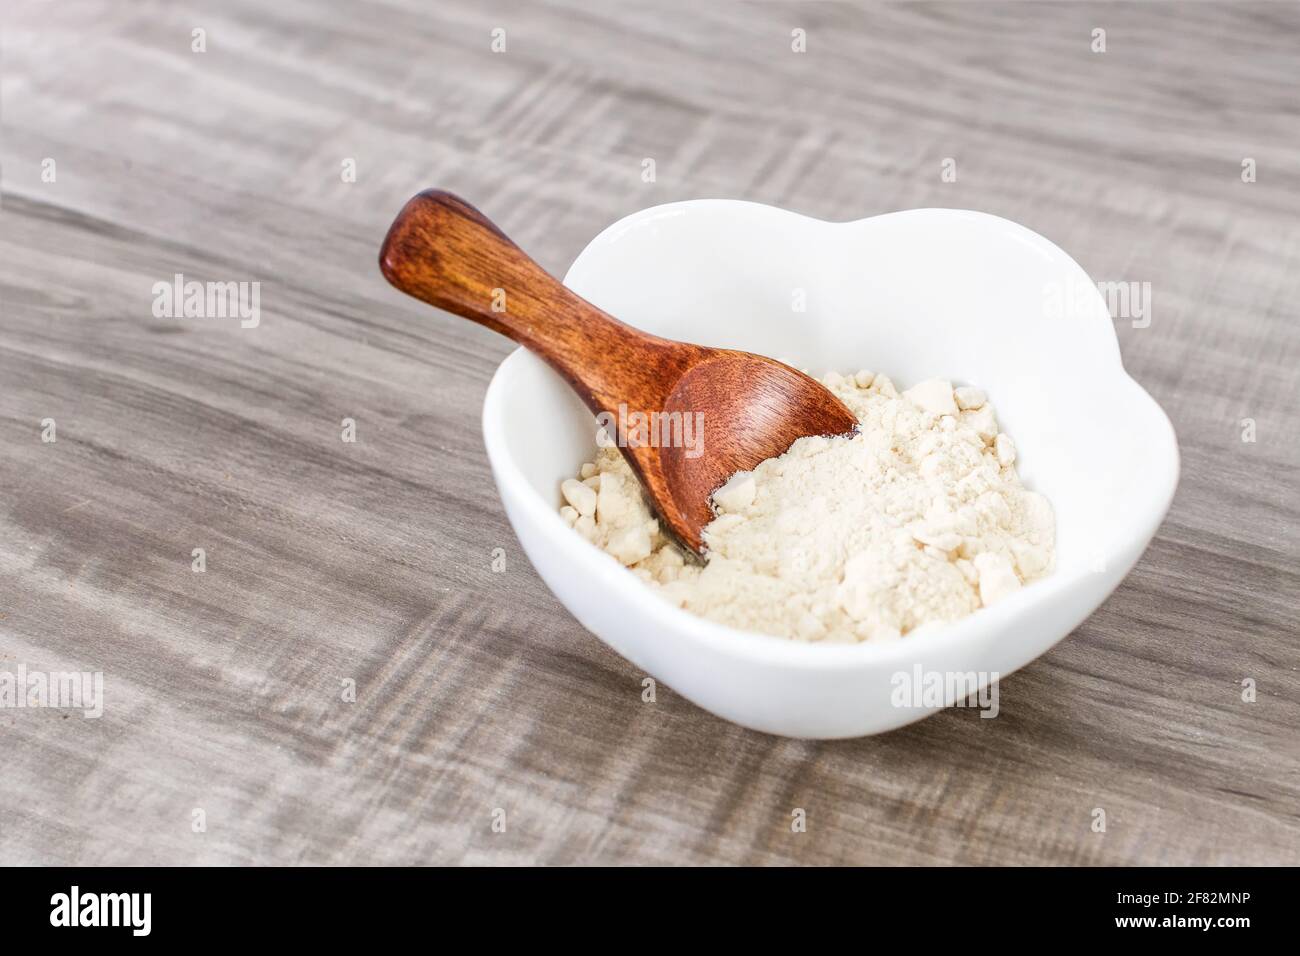 A closeup of a wooden spoon with garlic powder in a bowl Stock Photo